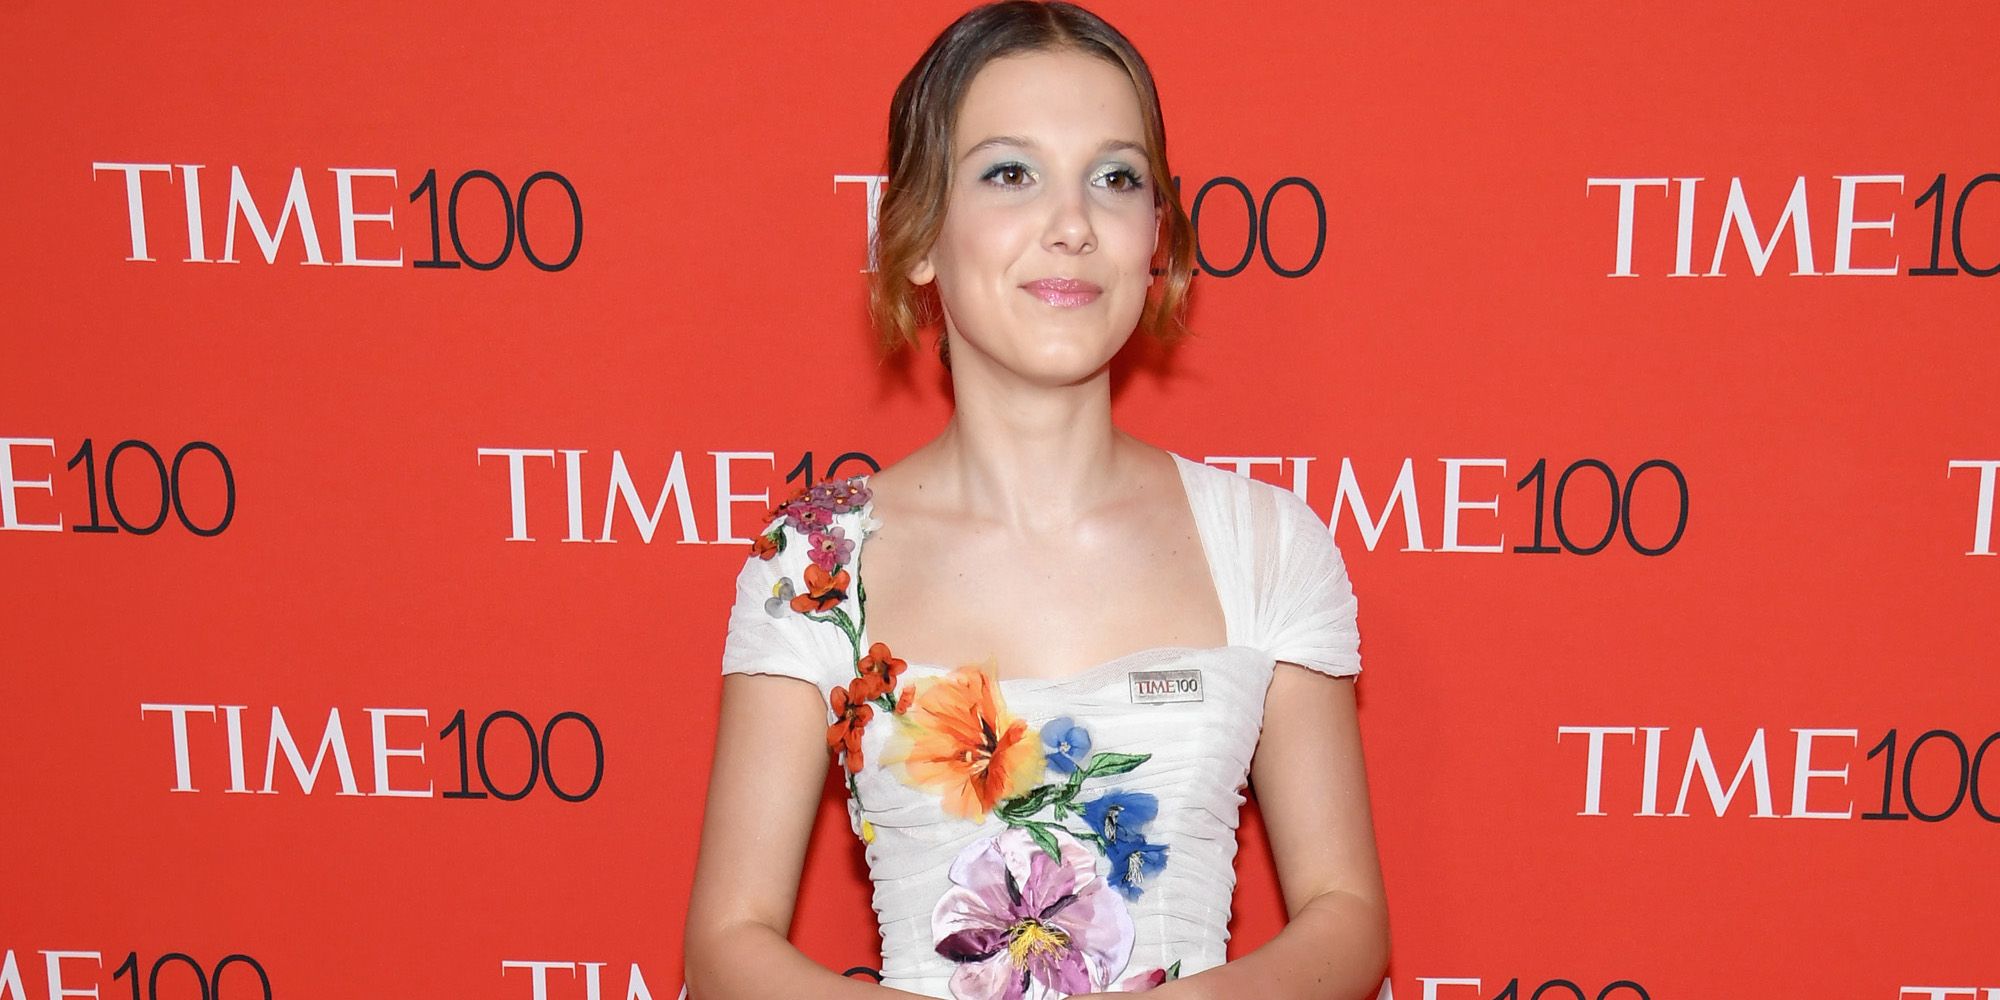 Millie Bobby Brown's Best Fashion Moments: Red Carpet Photos